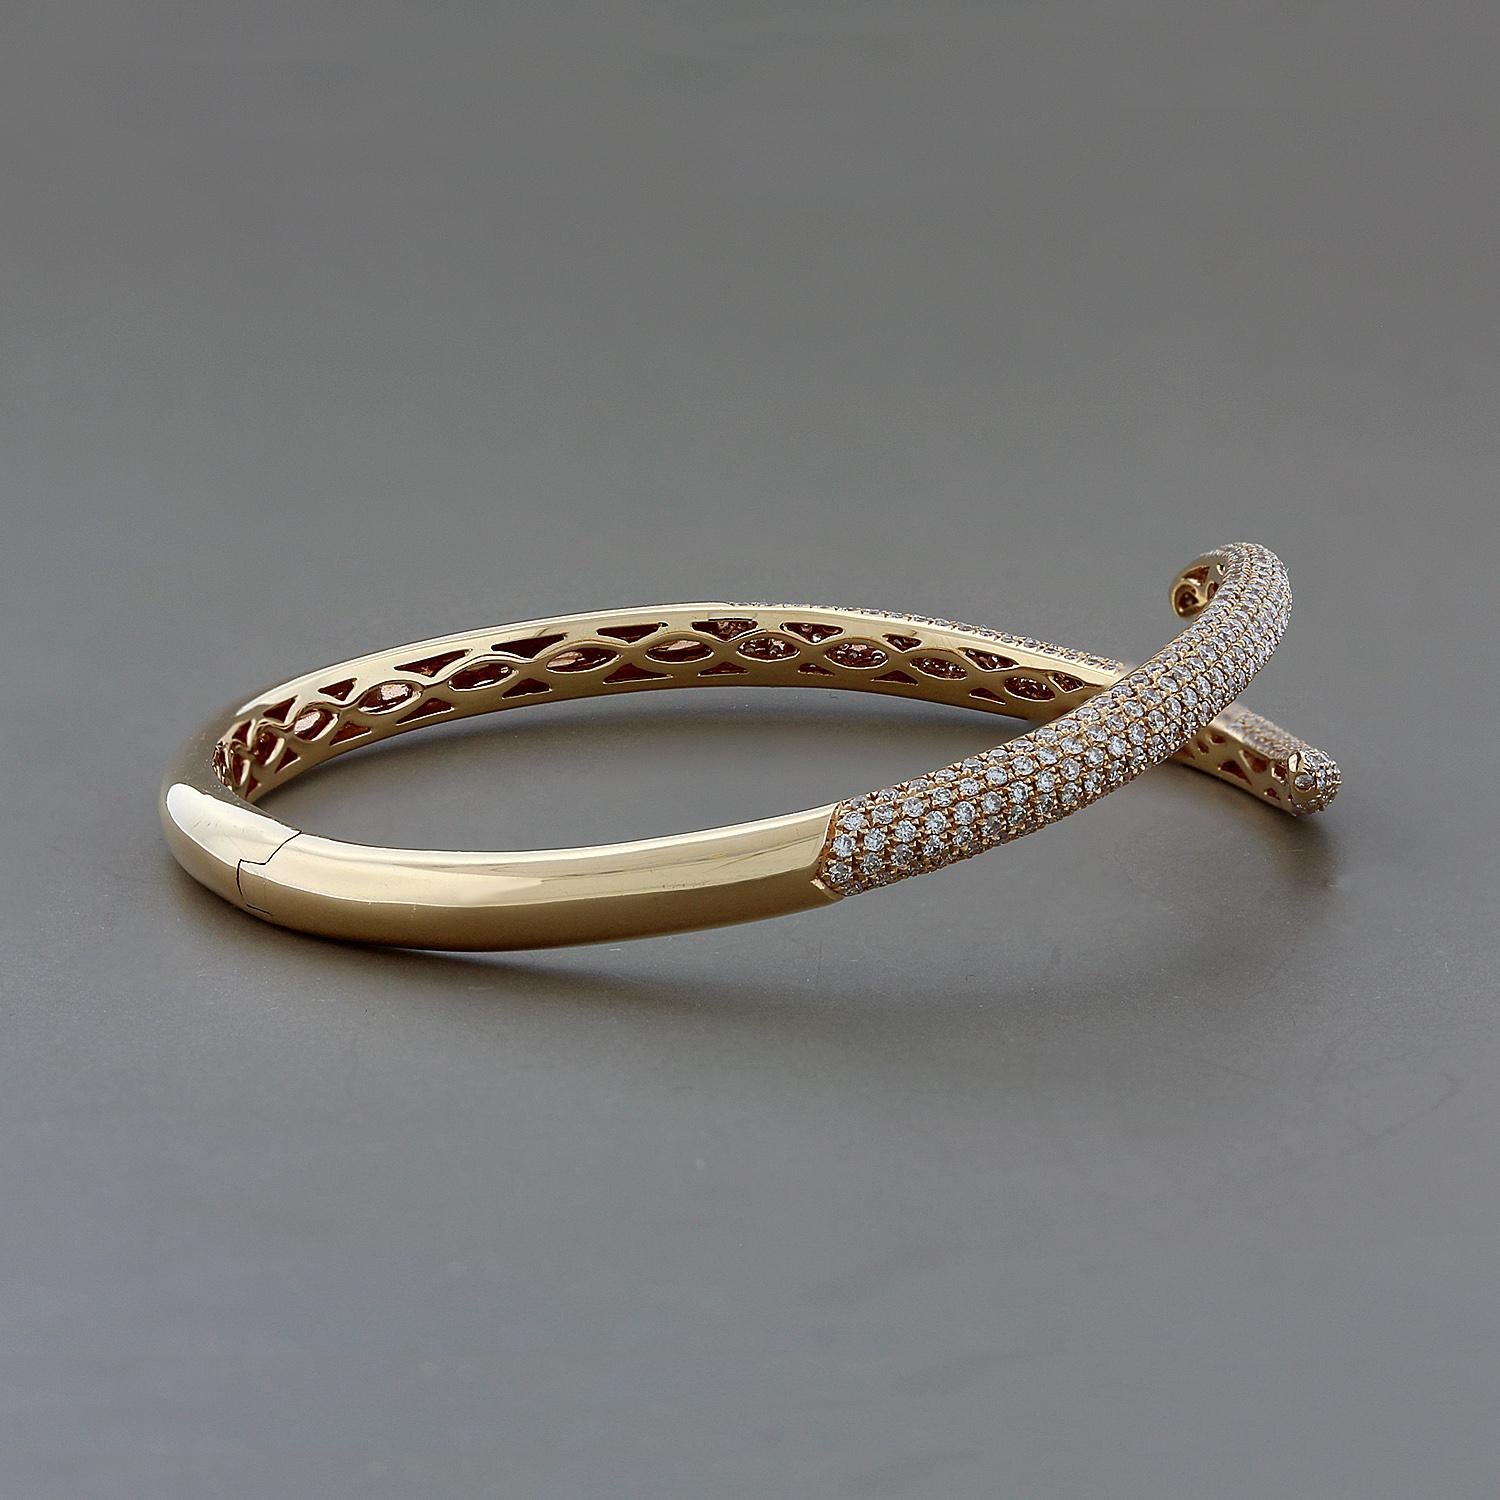 An amusing cuff with snake tails featuring 2.58 carats of VS quality round cut diamonds pave set in 18K rose gold. A sleek and stylish cuff. 

Fits wrists up to 7.50 inches